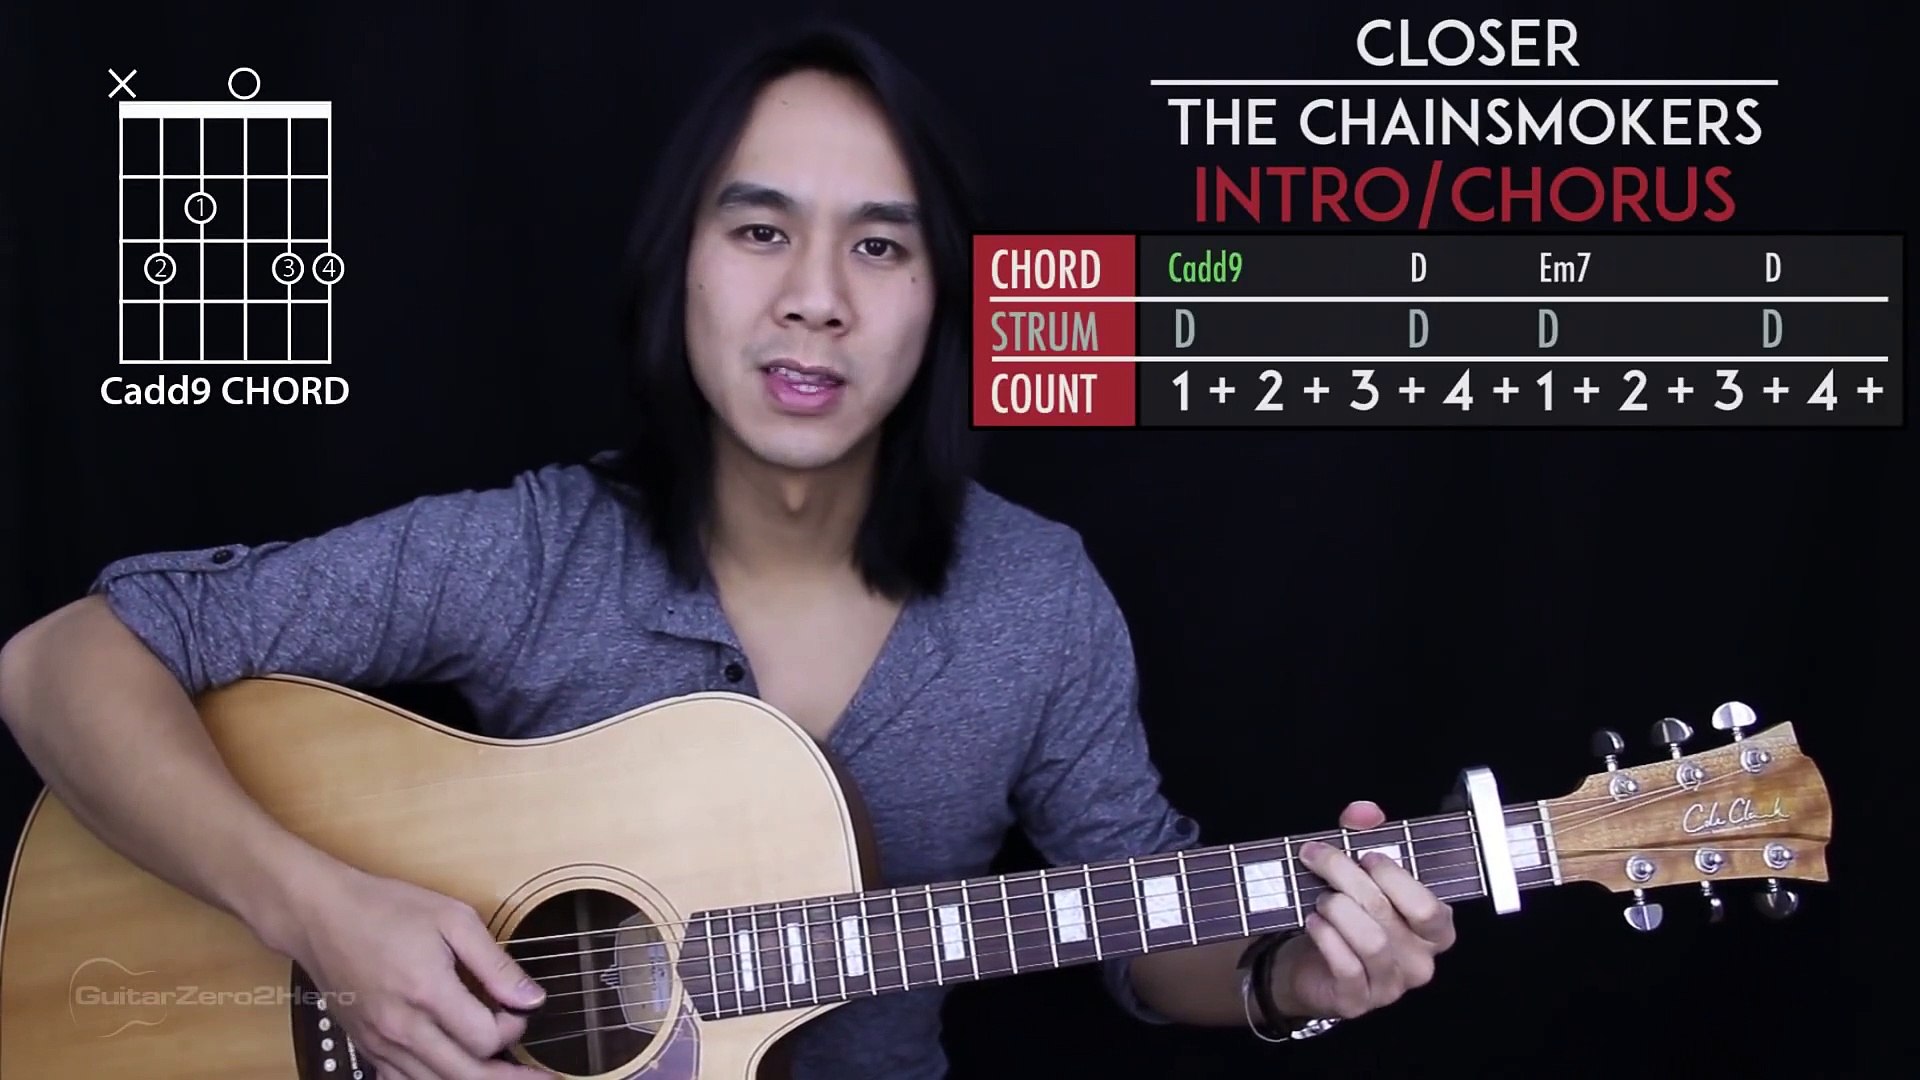 Closer The Chainsmokers Feat. Halsey Guitar Tutorial Lesson Tabs + Chords +  Cover - video Dailymotion